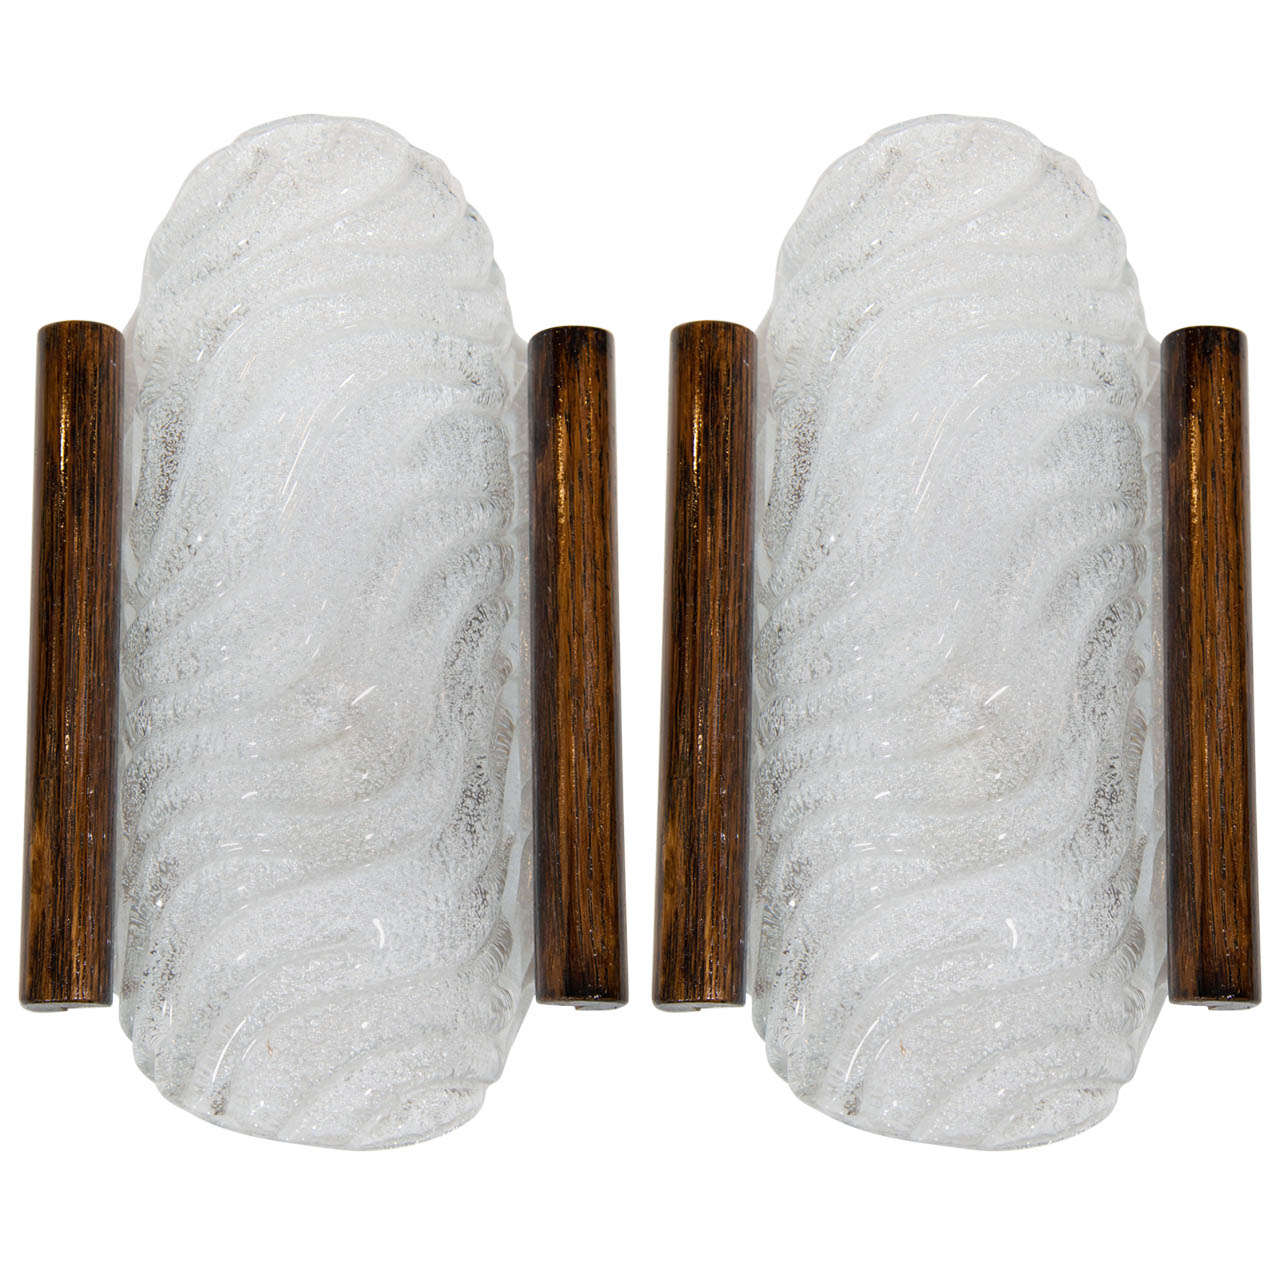 Barovier and Toso Murano Glass Sconces with Wood Detail, 1950's